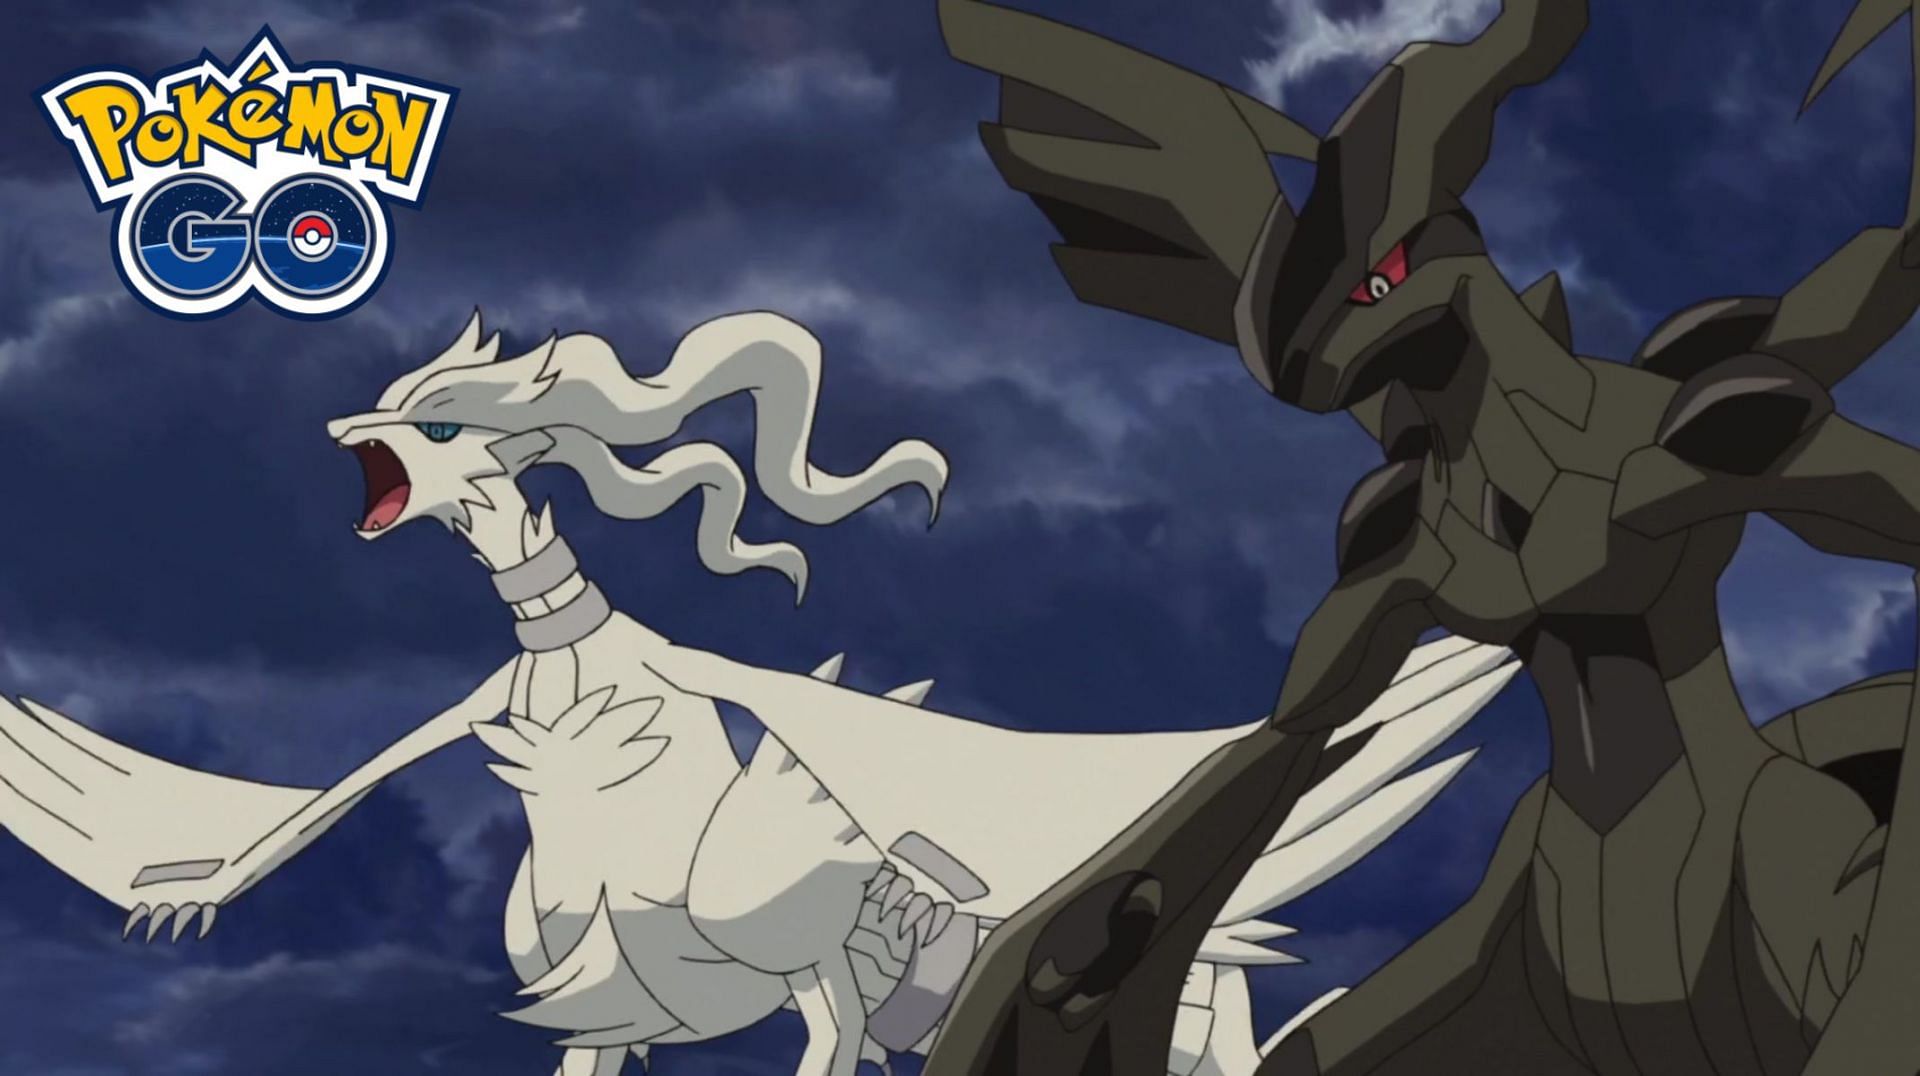 Zekrom is one of the main legendary dragon Pokemon featured in Pokemon: Black and White versions (Image via The Pokemon Company)